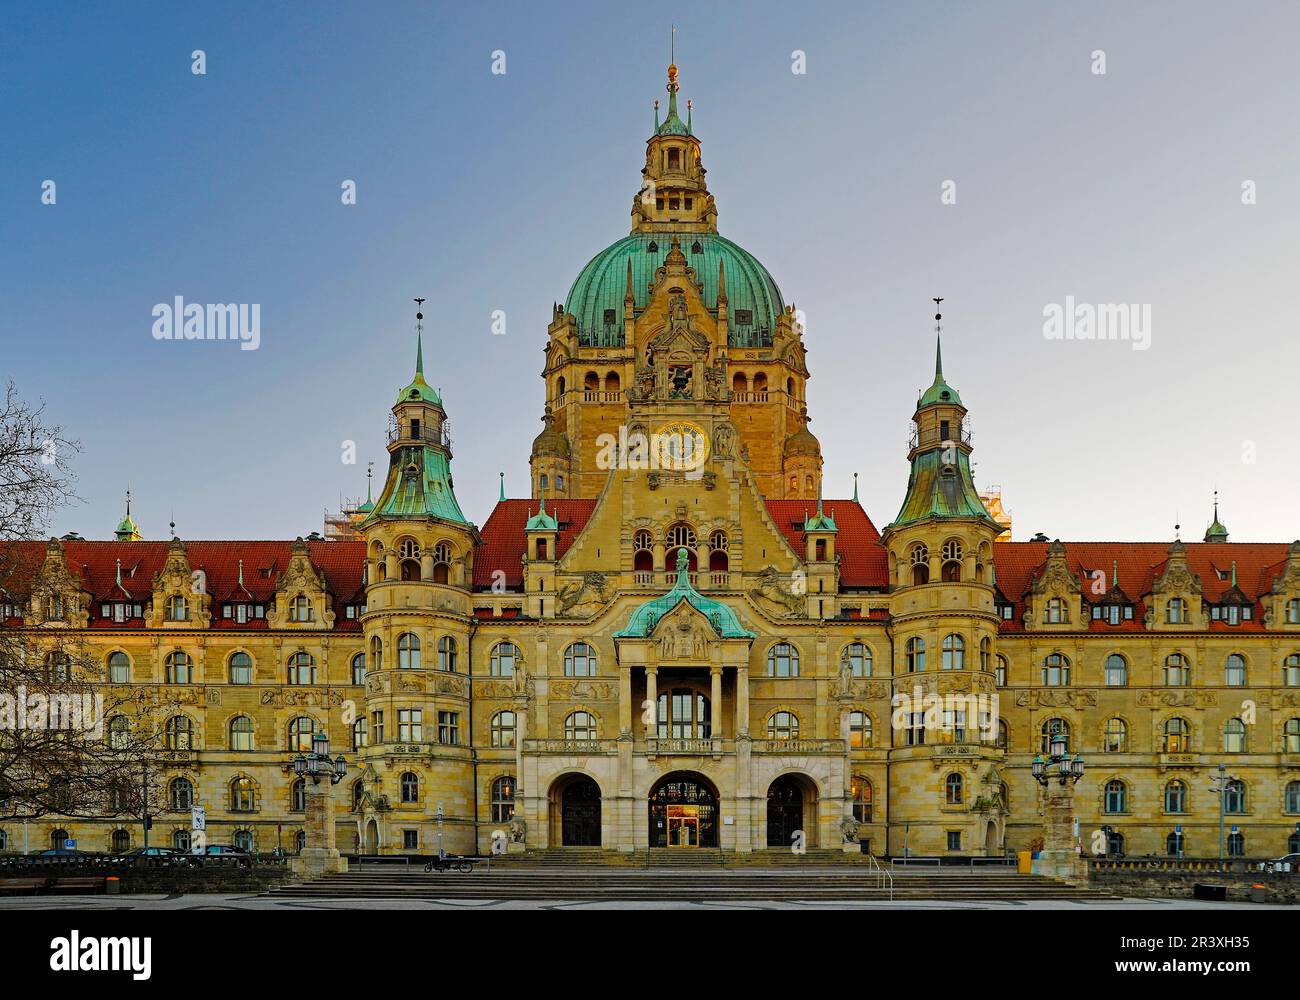 New Town Hall, Wilhelminian, palace-like magnificent building in eclectic style, Hanover, Germany Stock Photo